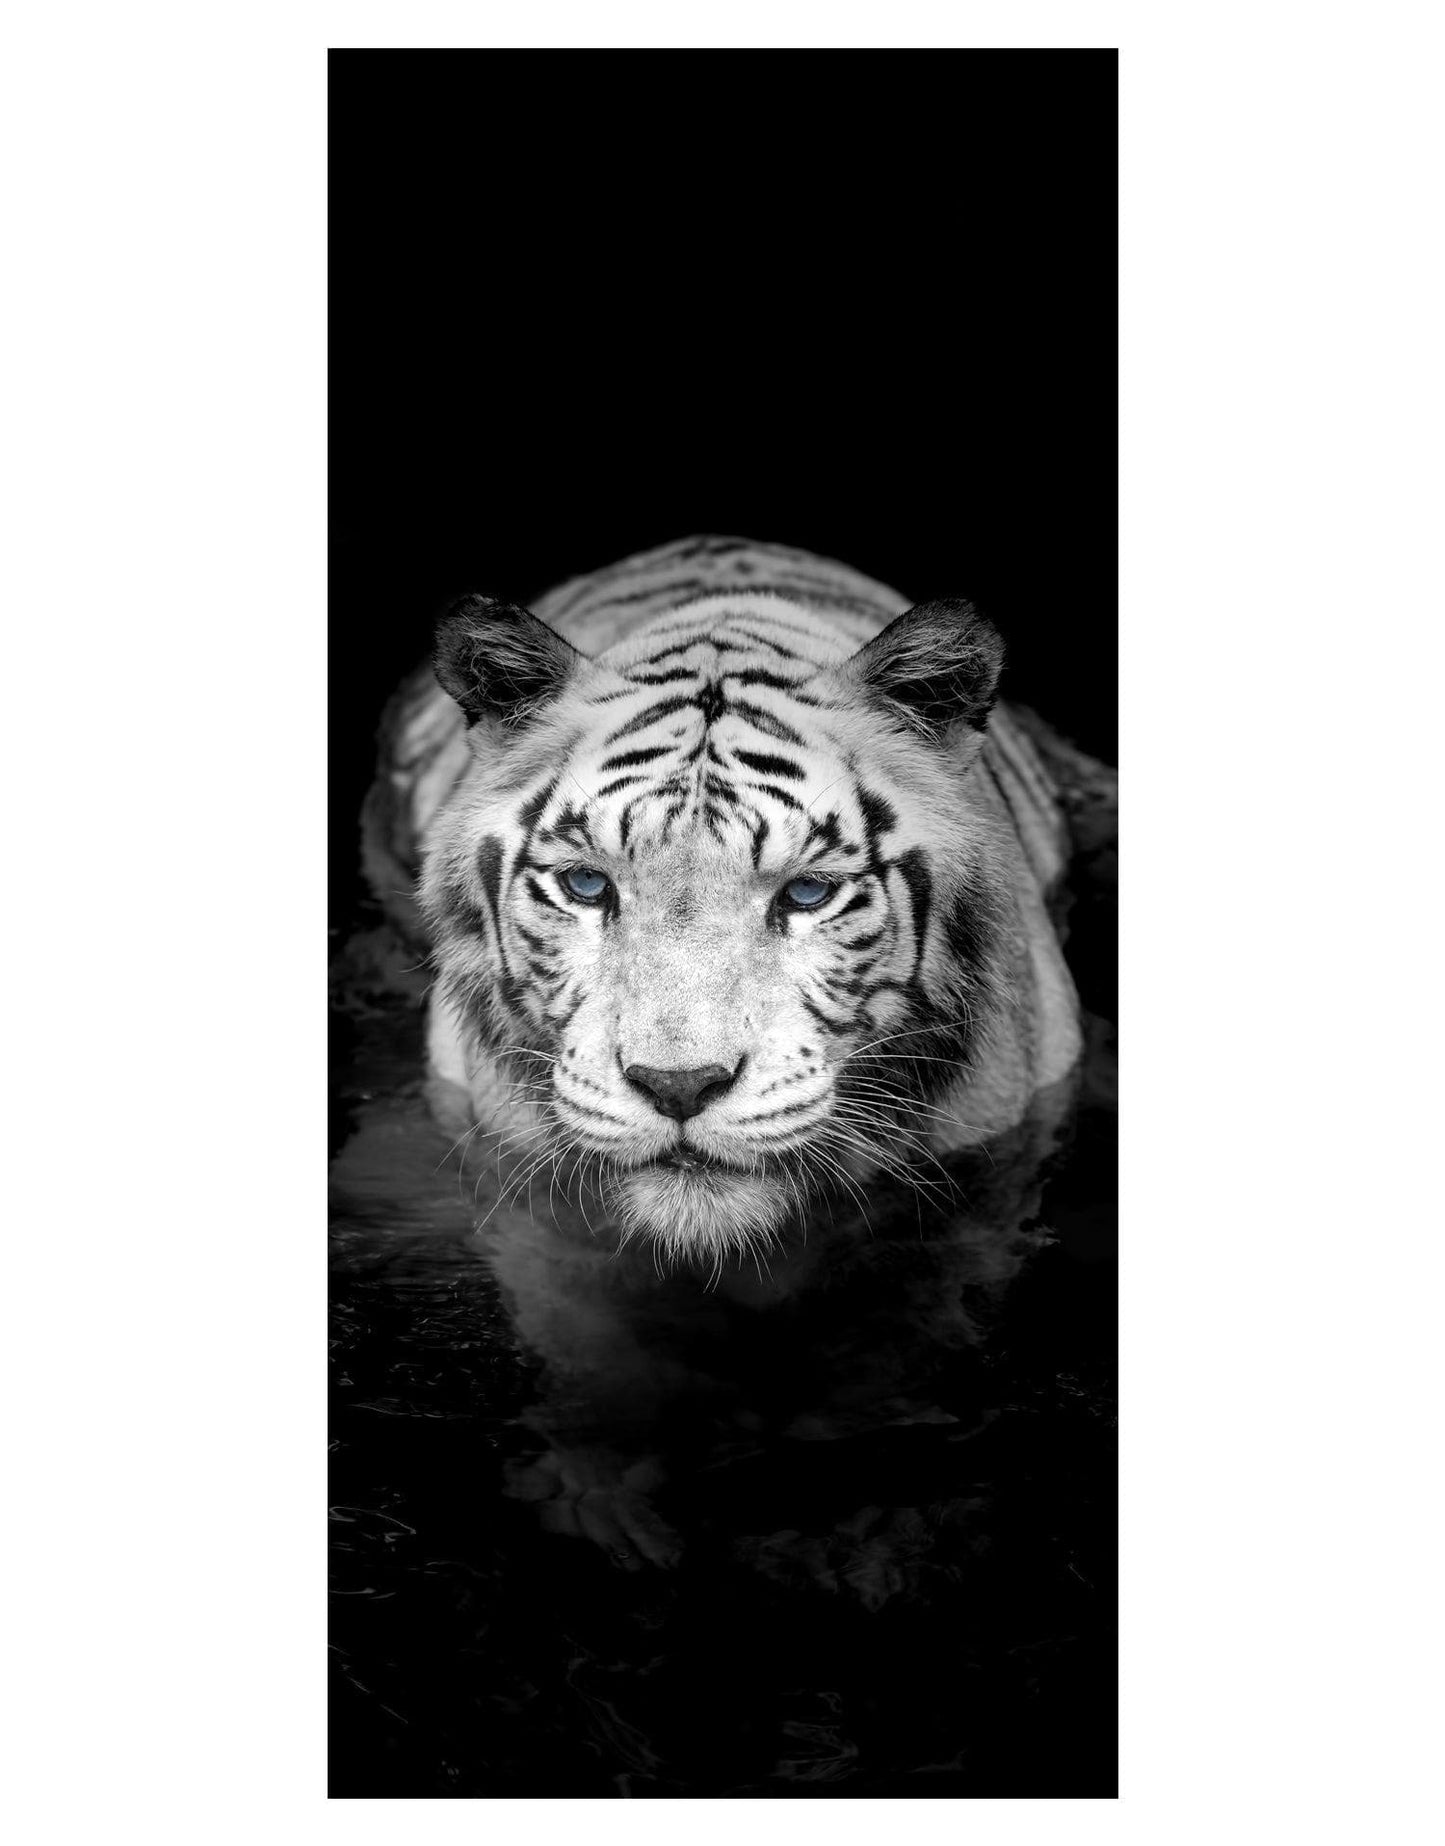 Tiger Stare Down Large Mural (Black and White) #6045